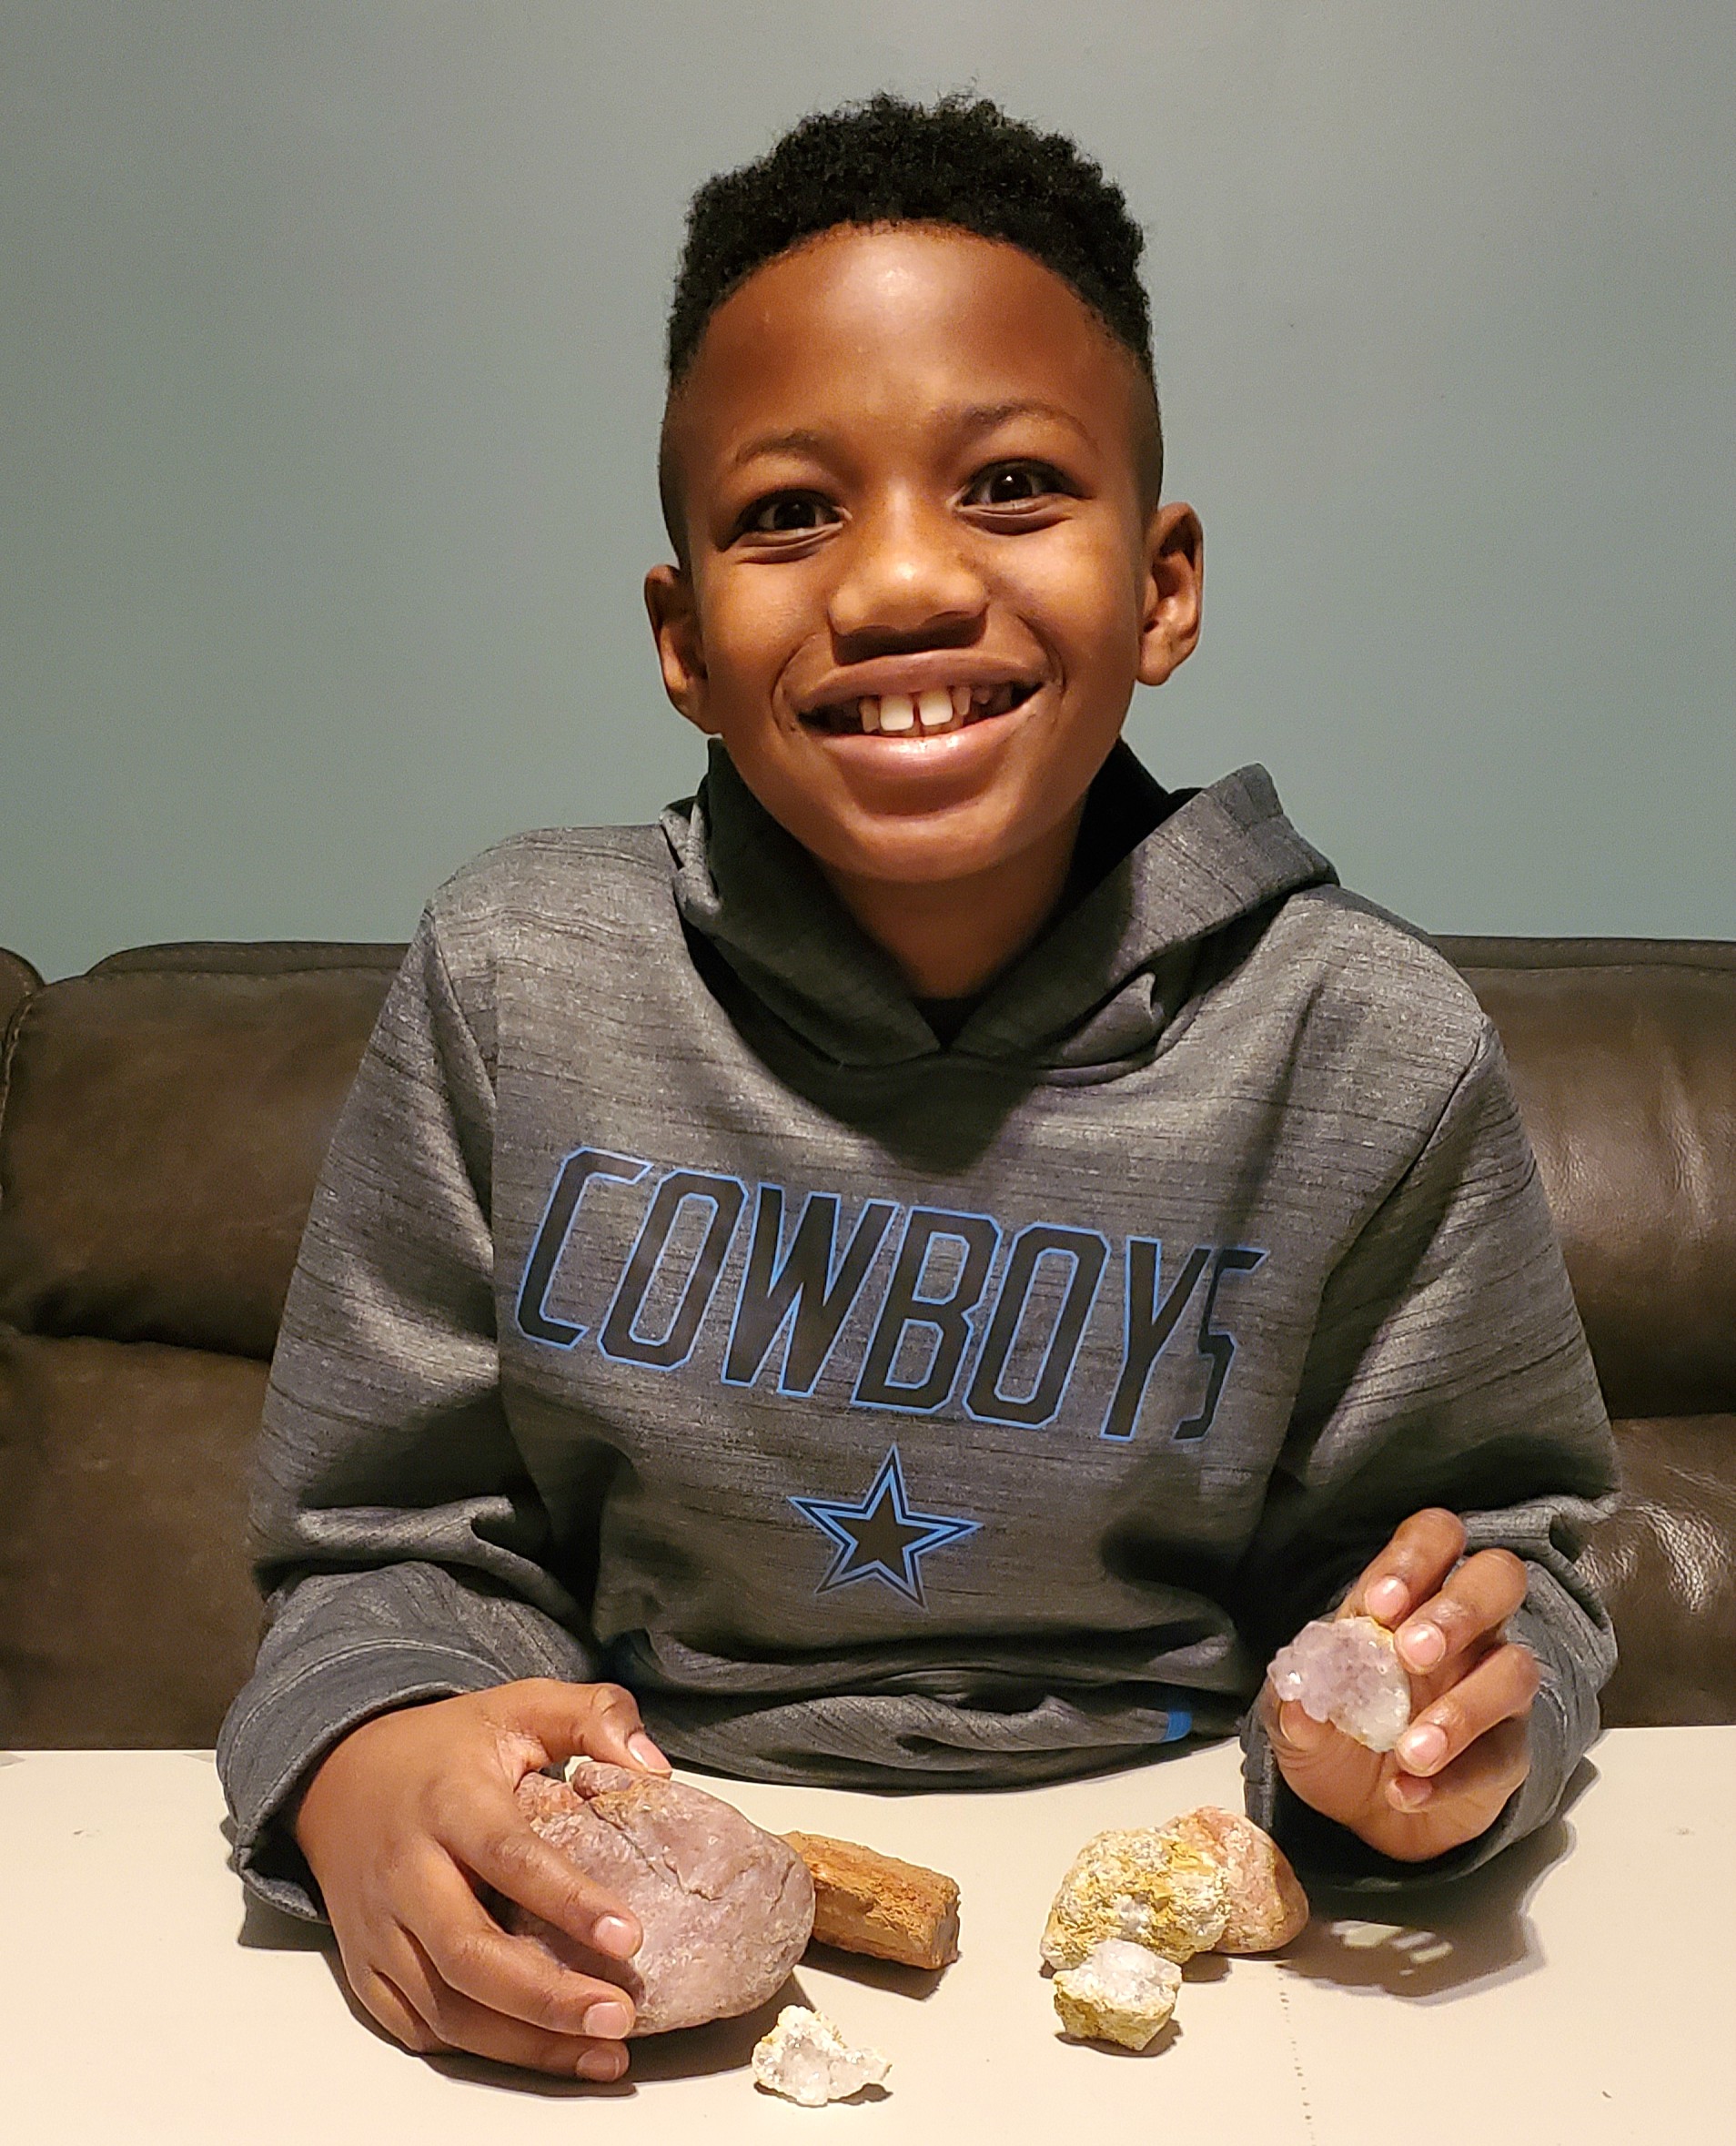 Fifth-grader Jahari Barron hopes to become a geologist.